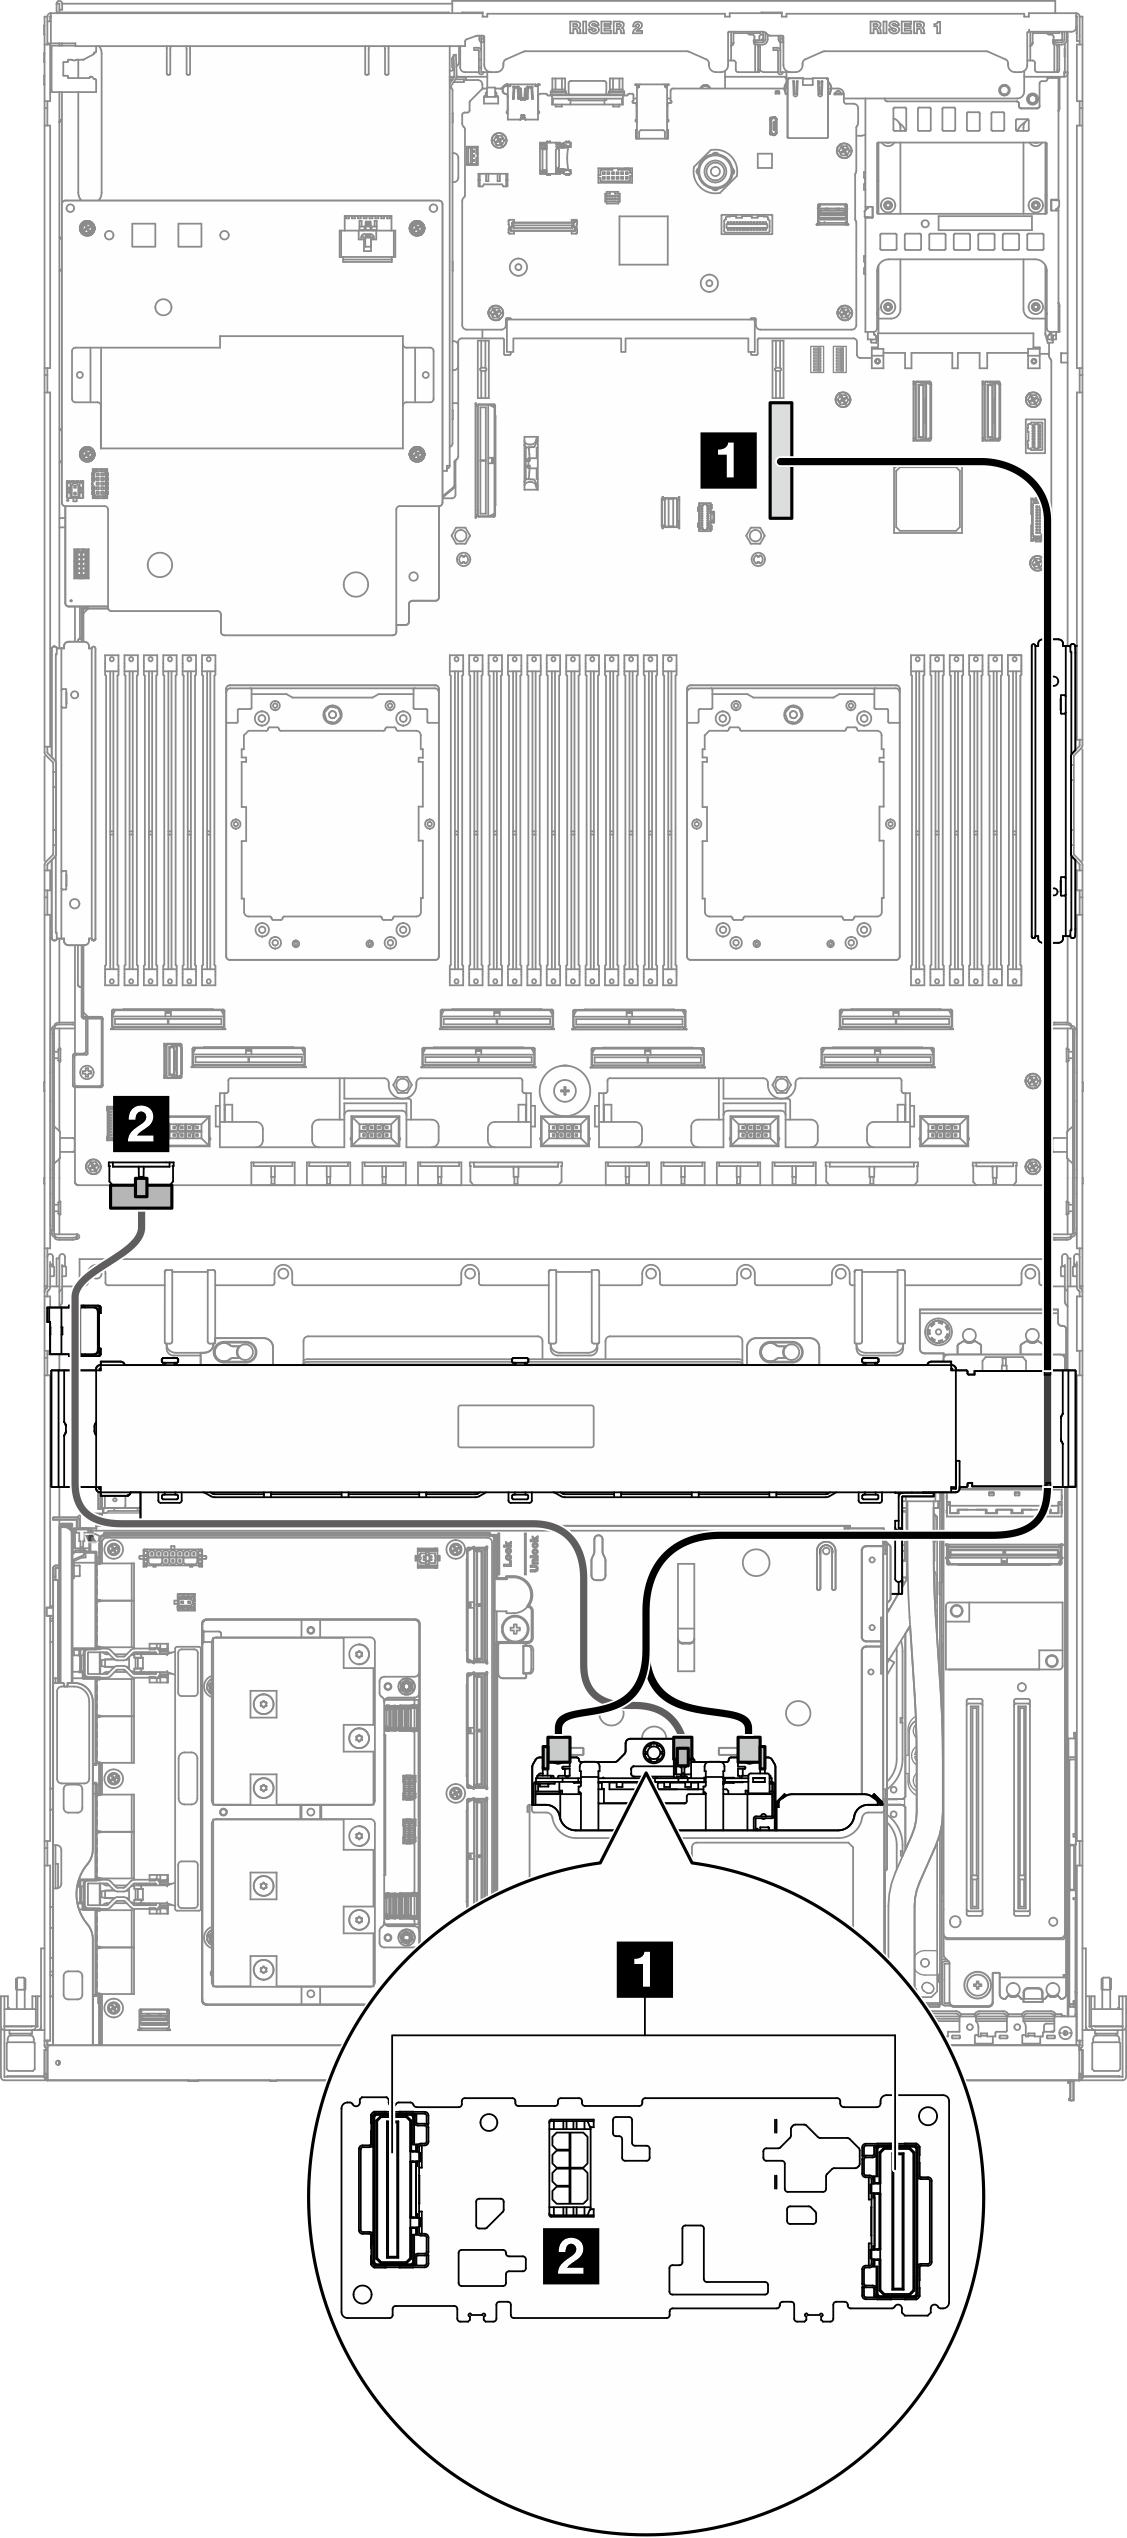 E3.S drive backplane cable routing